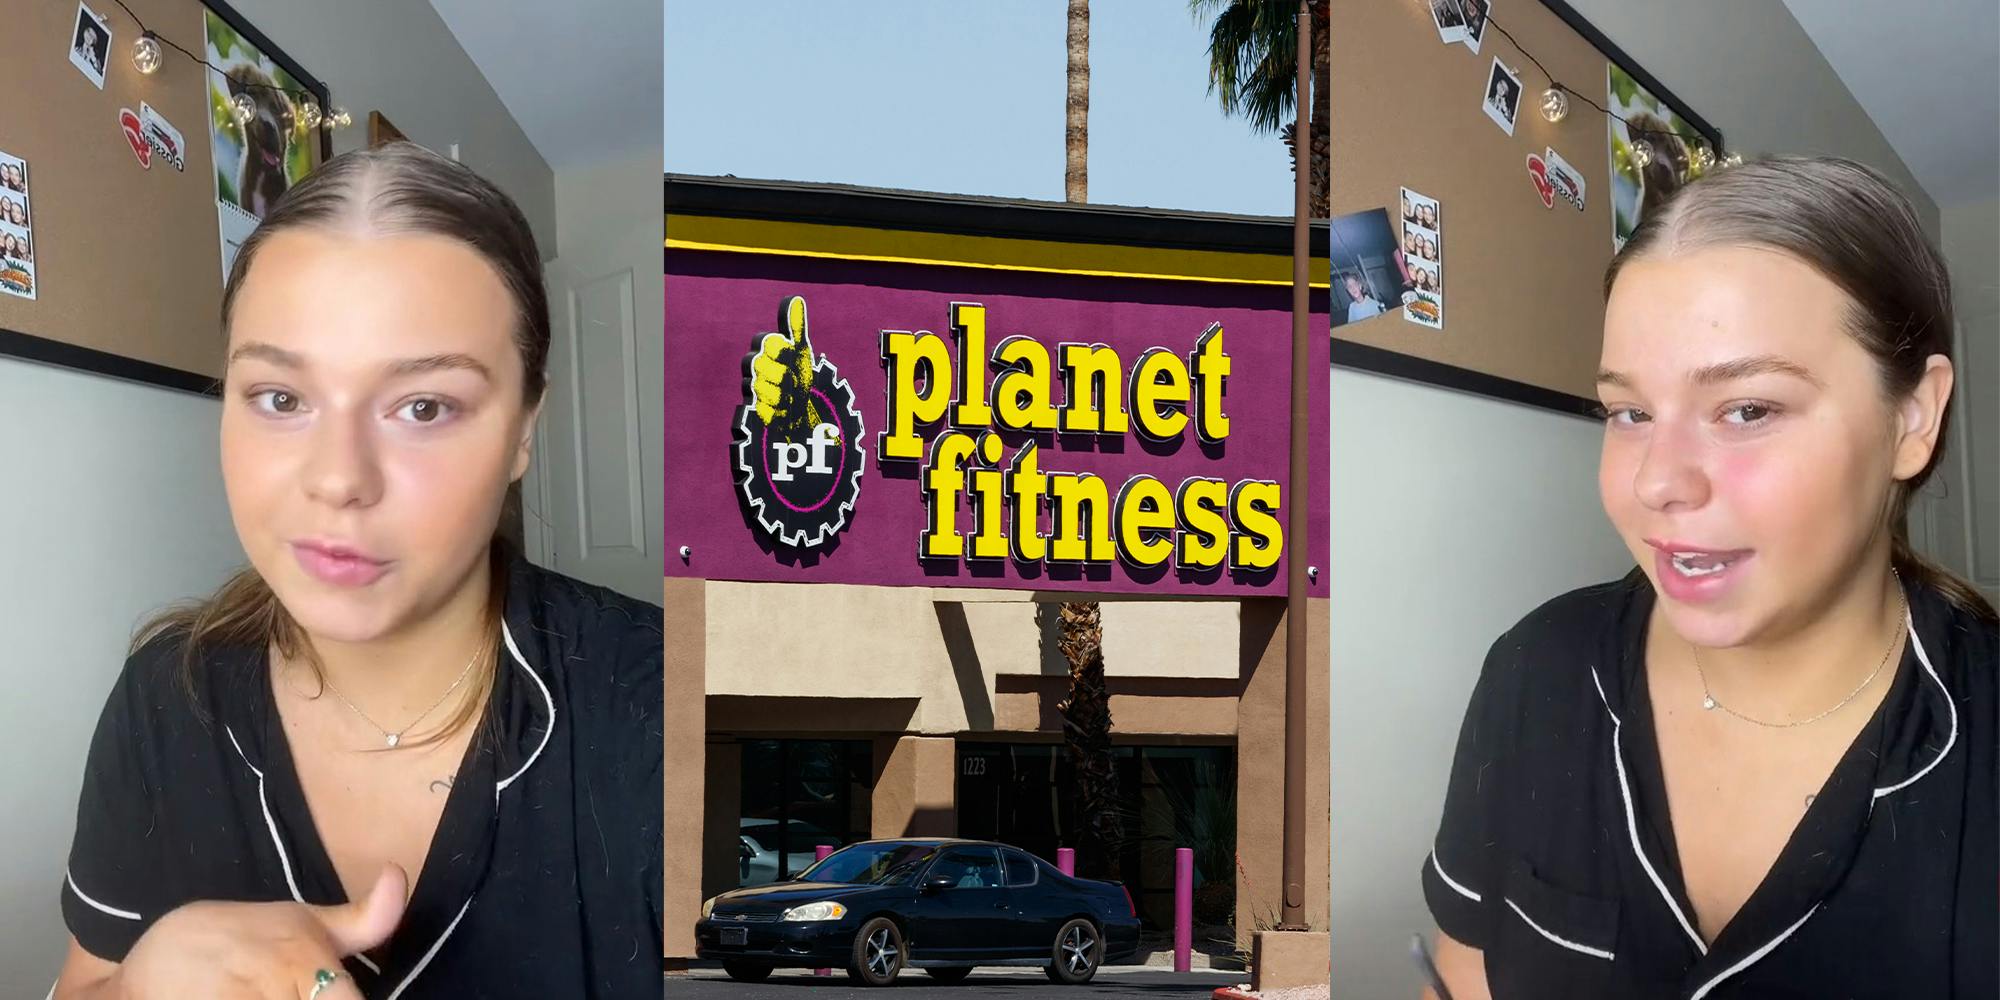 Worker Explains Why Planet Fitness Was the 'Worst Job' She's Ever Had